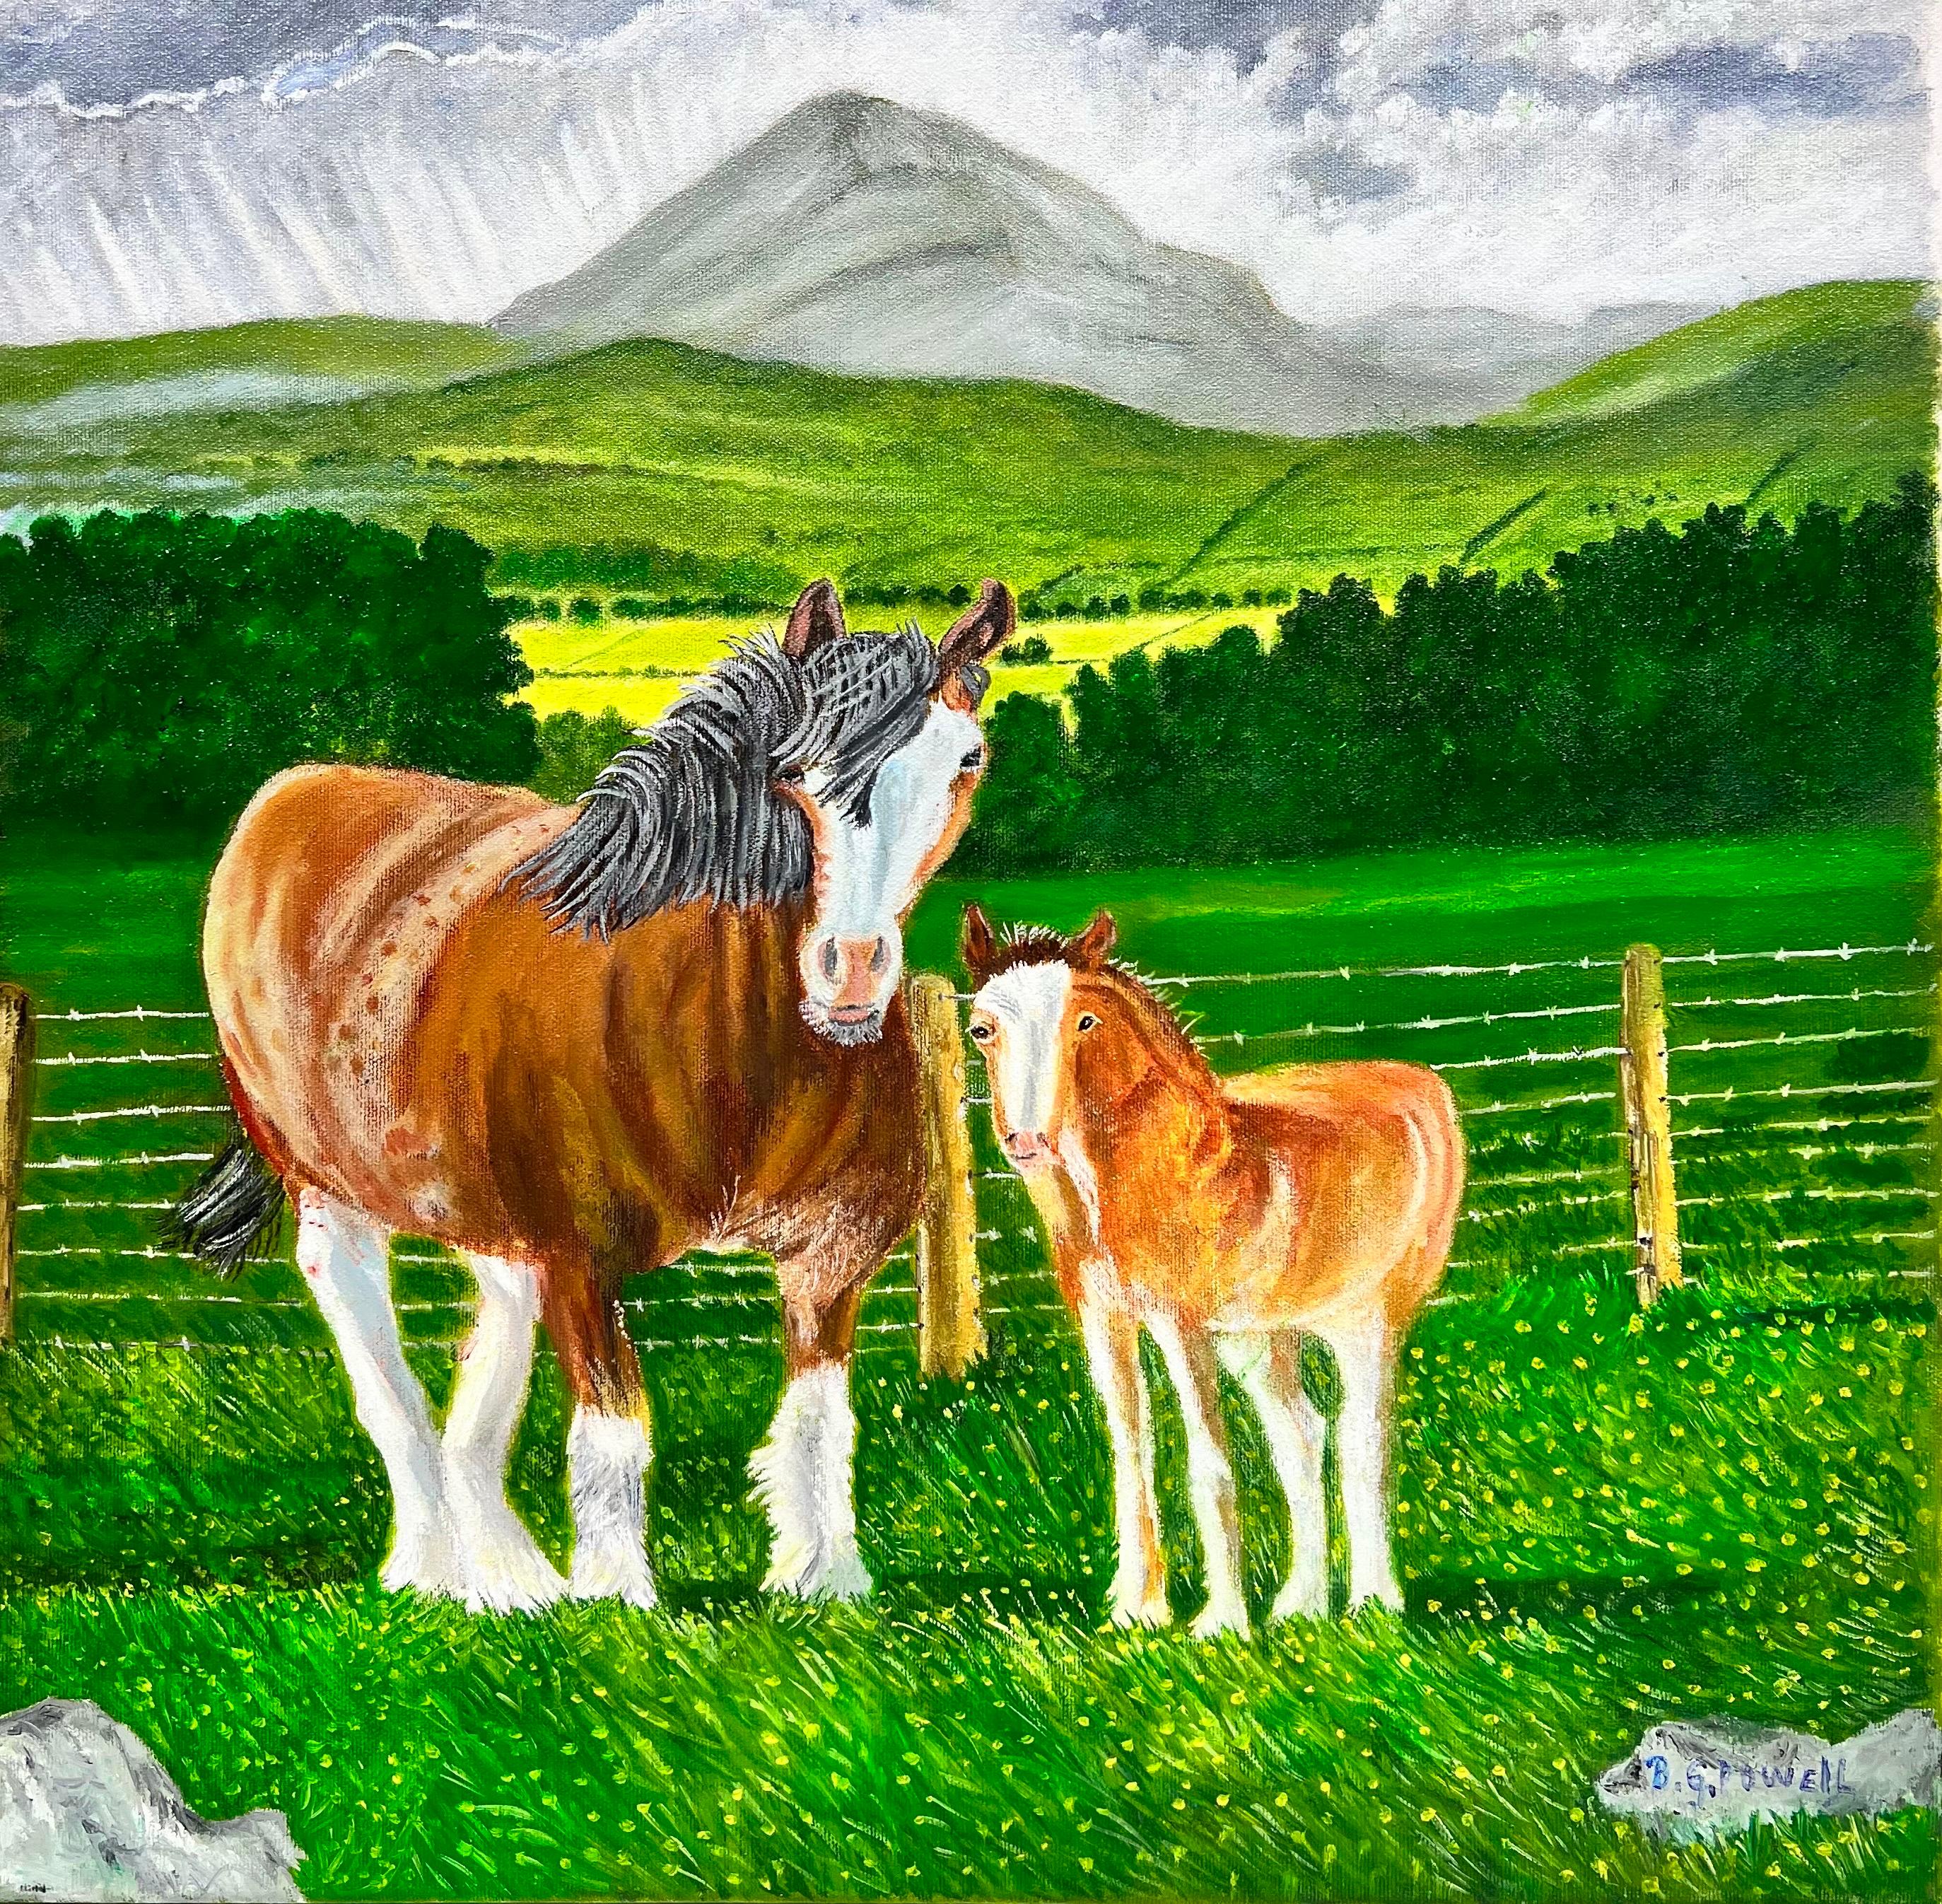 Ben Powell Landscape Painting - Horse & Foal in Mountain Landscape Contemporary British Painting